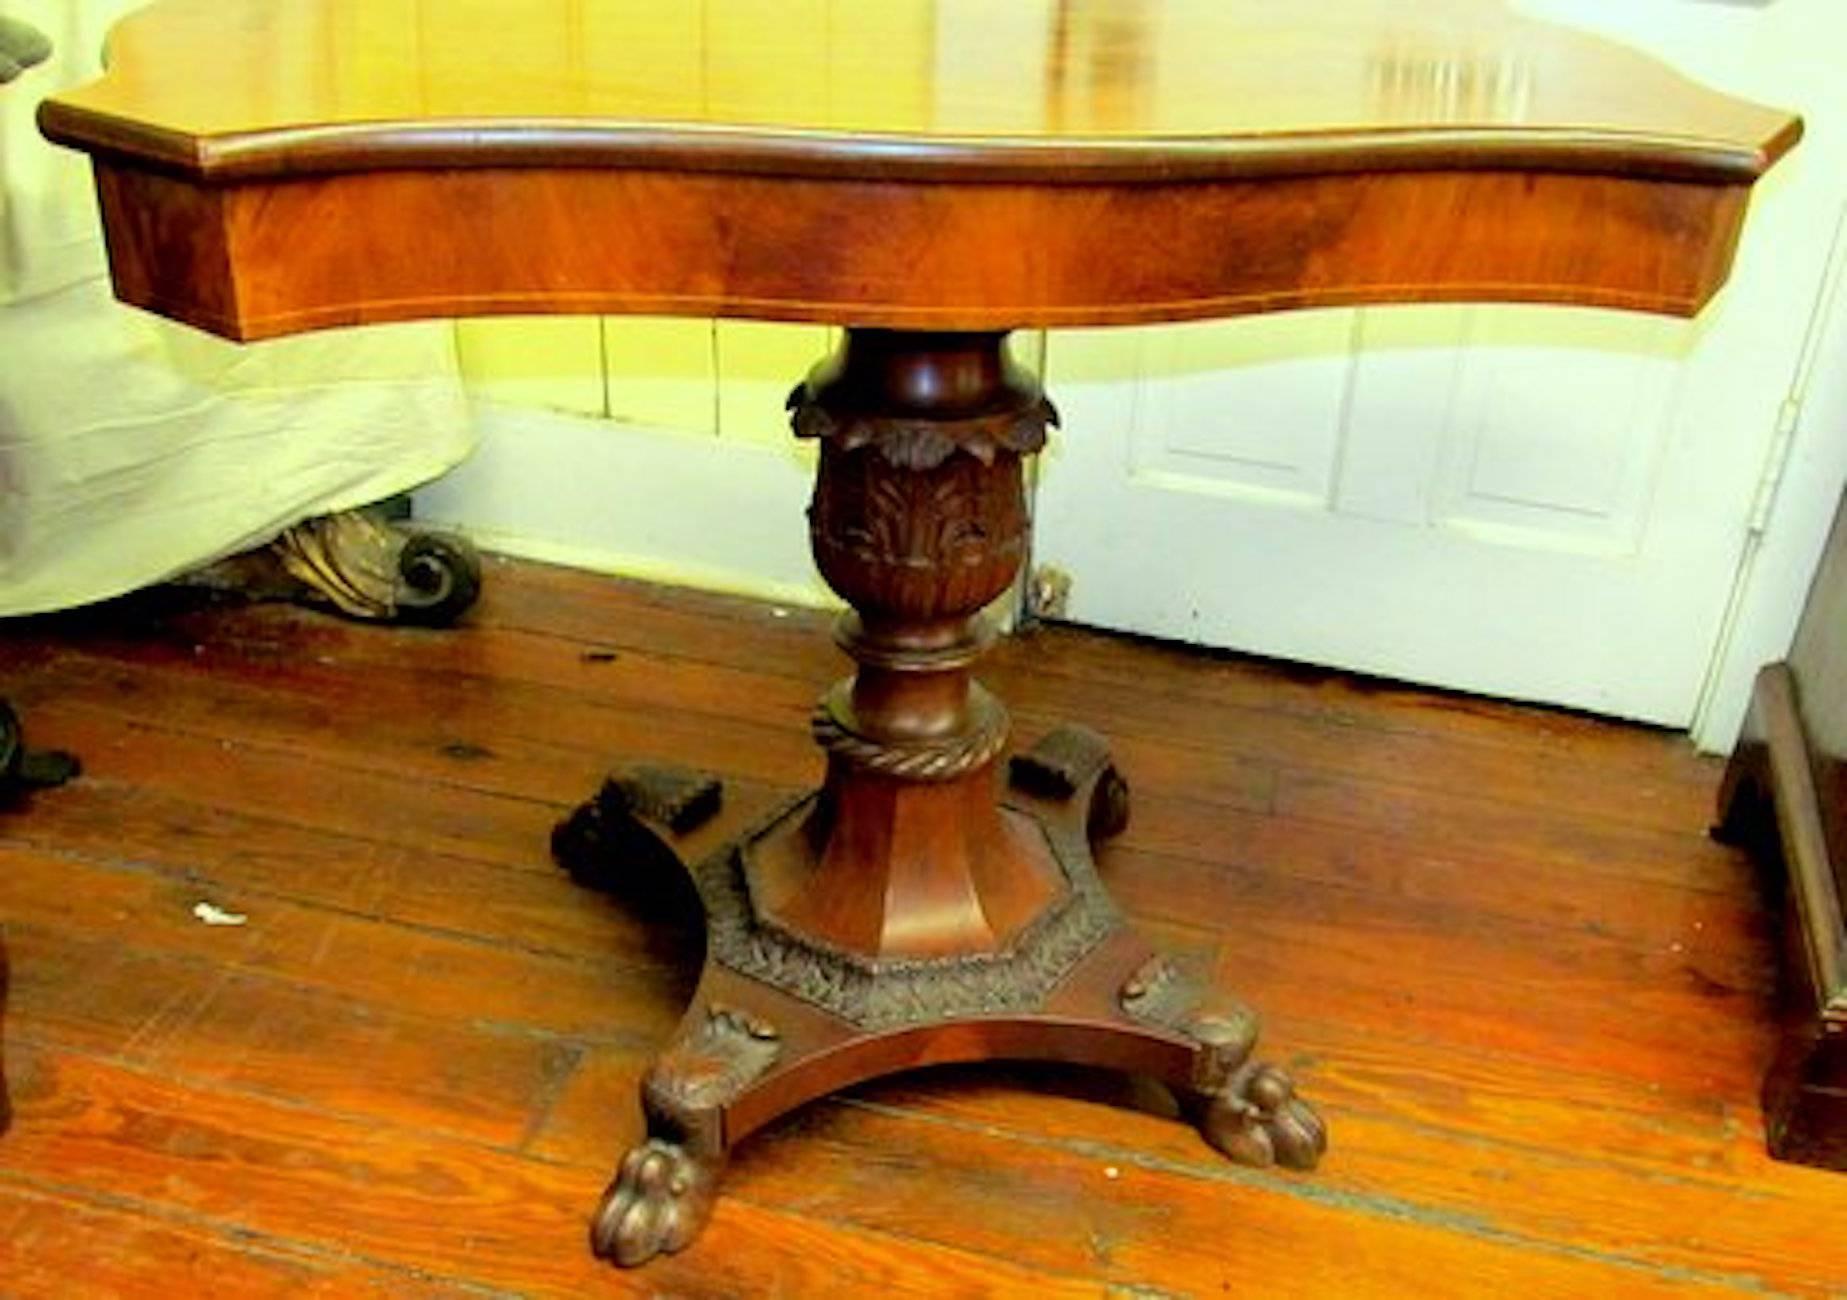 Antique American Empire flame mahogany console or center table with fabulous pineapple carved urn-shaped pedestal.
 
Please note exceptional hand-carved 